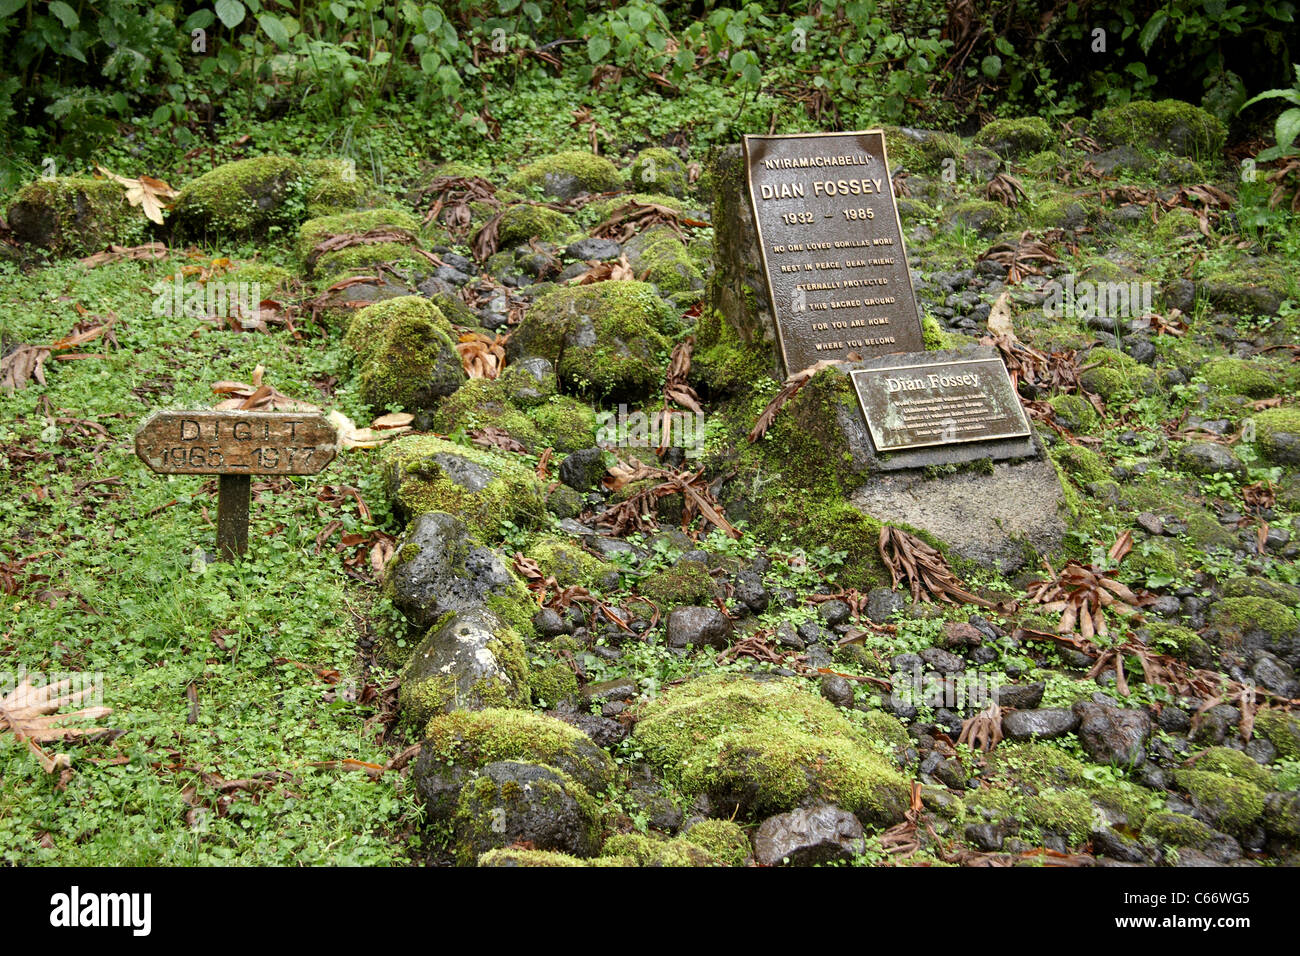 Dian fossey not movie hi-res stock photography and images - Alamy